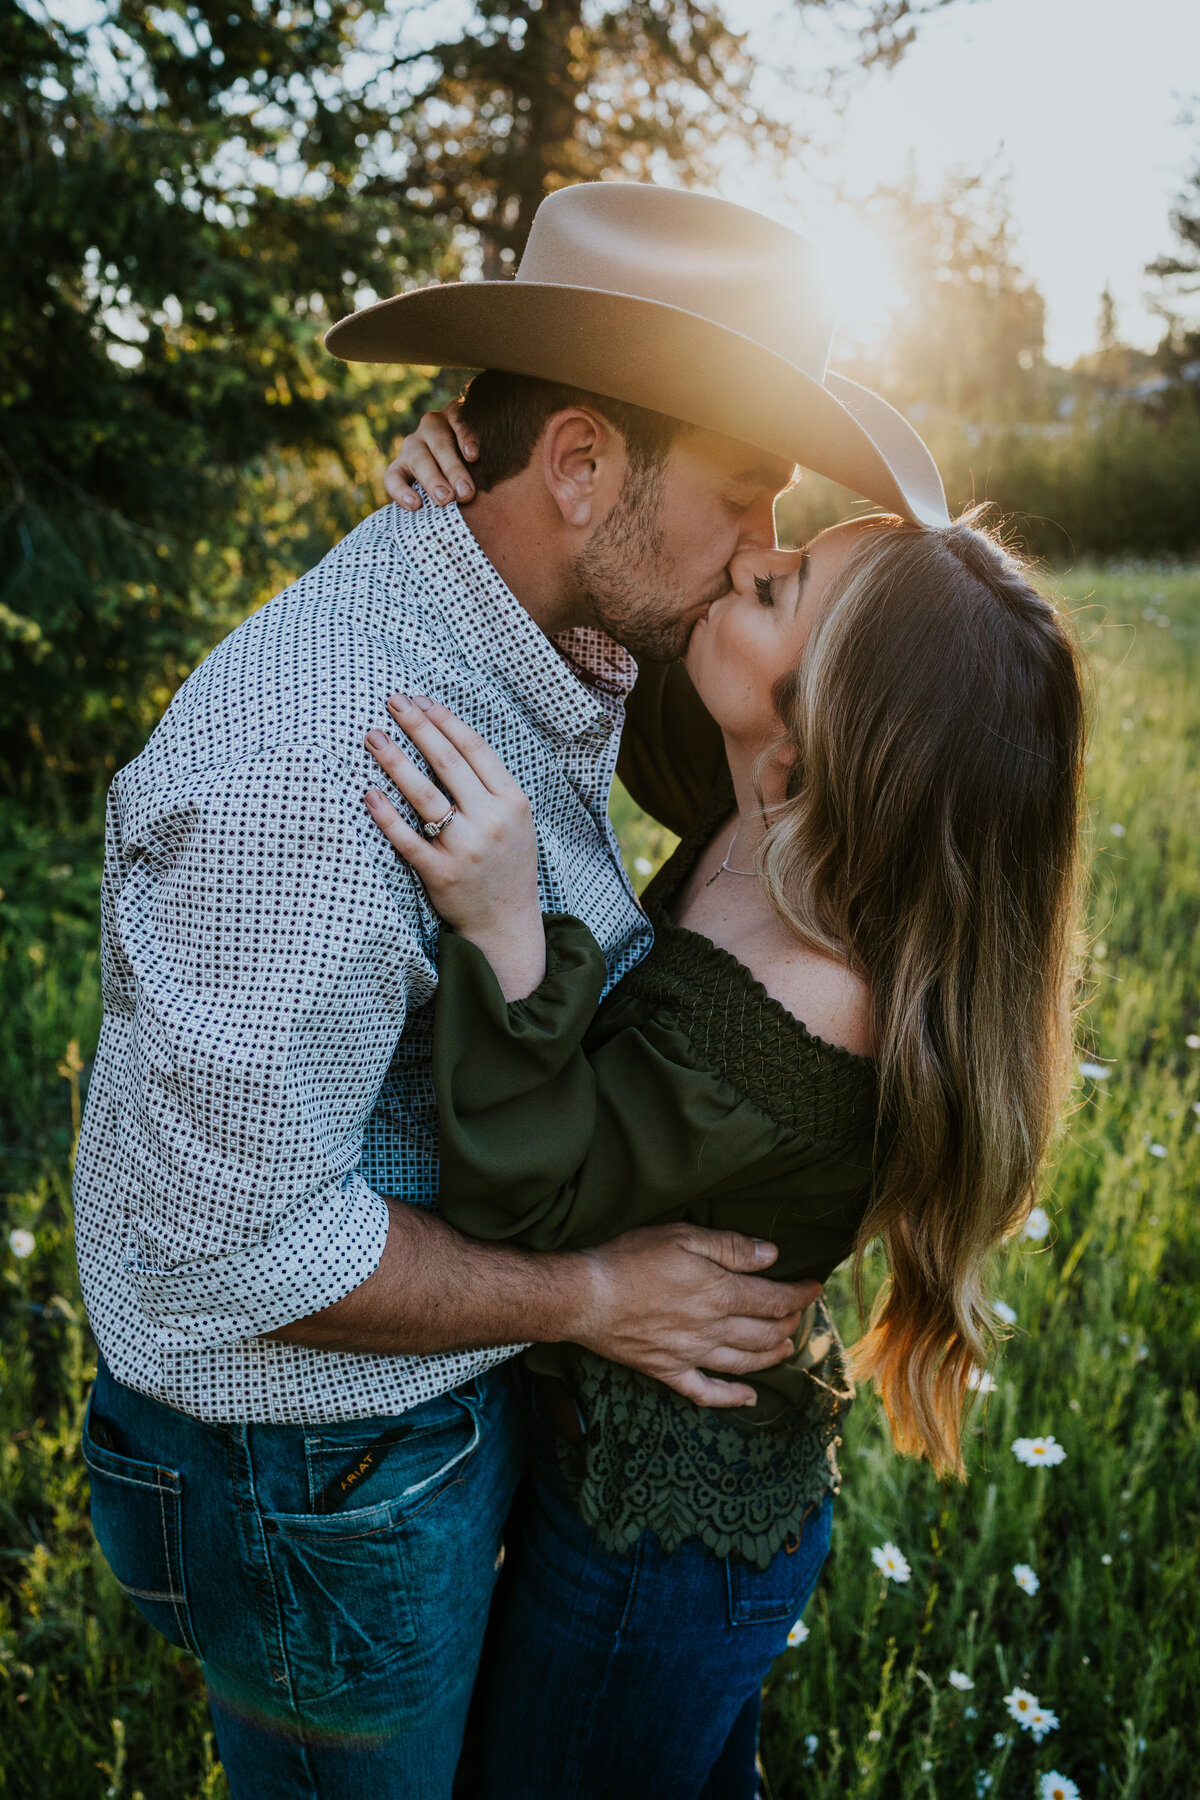 Couple embrace each other and kiss while sun sets behind his cowboy hat.